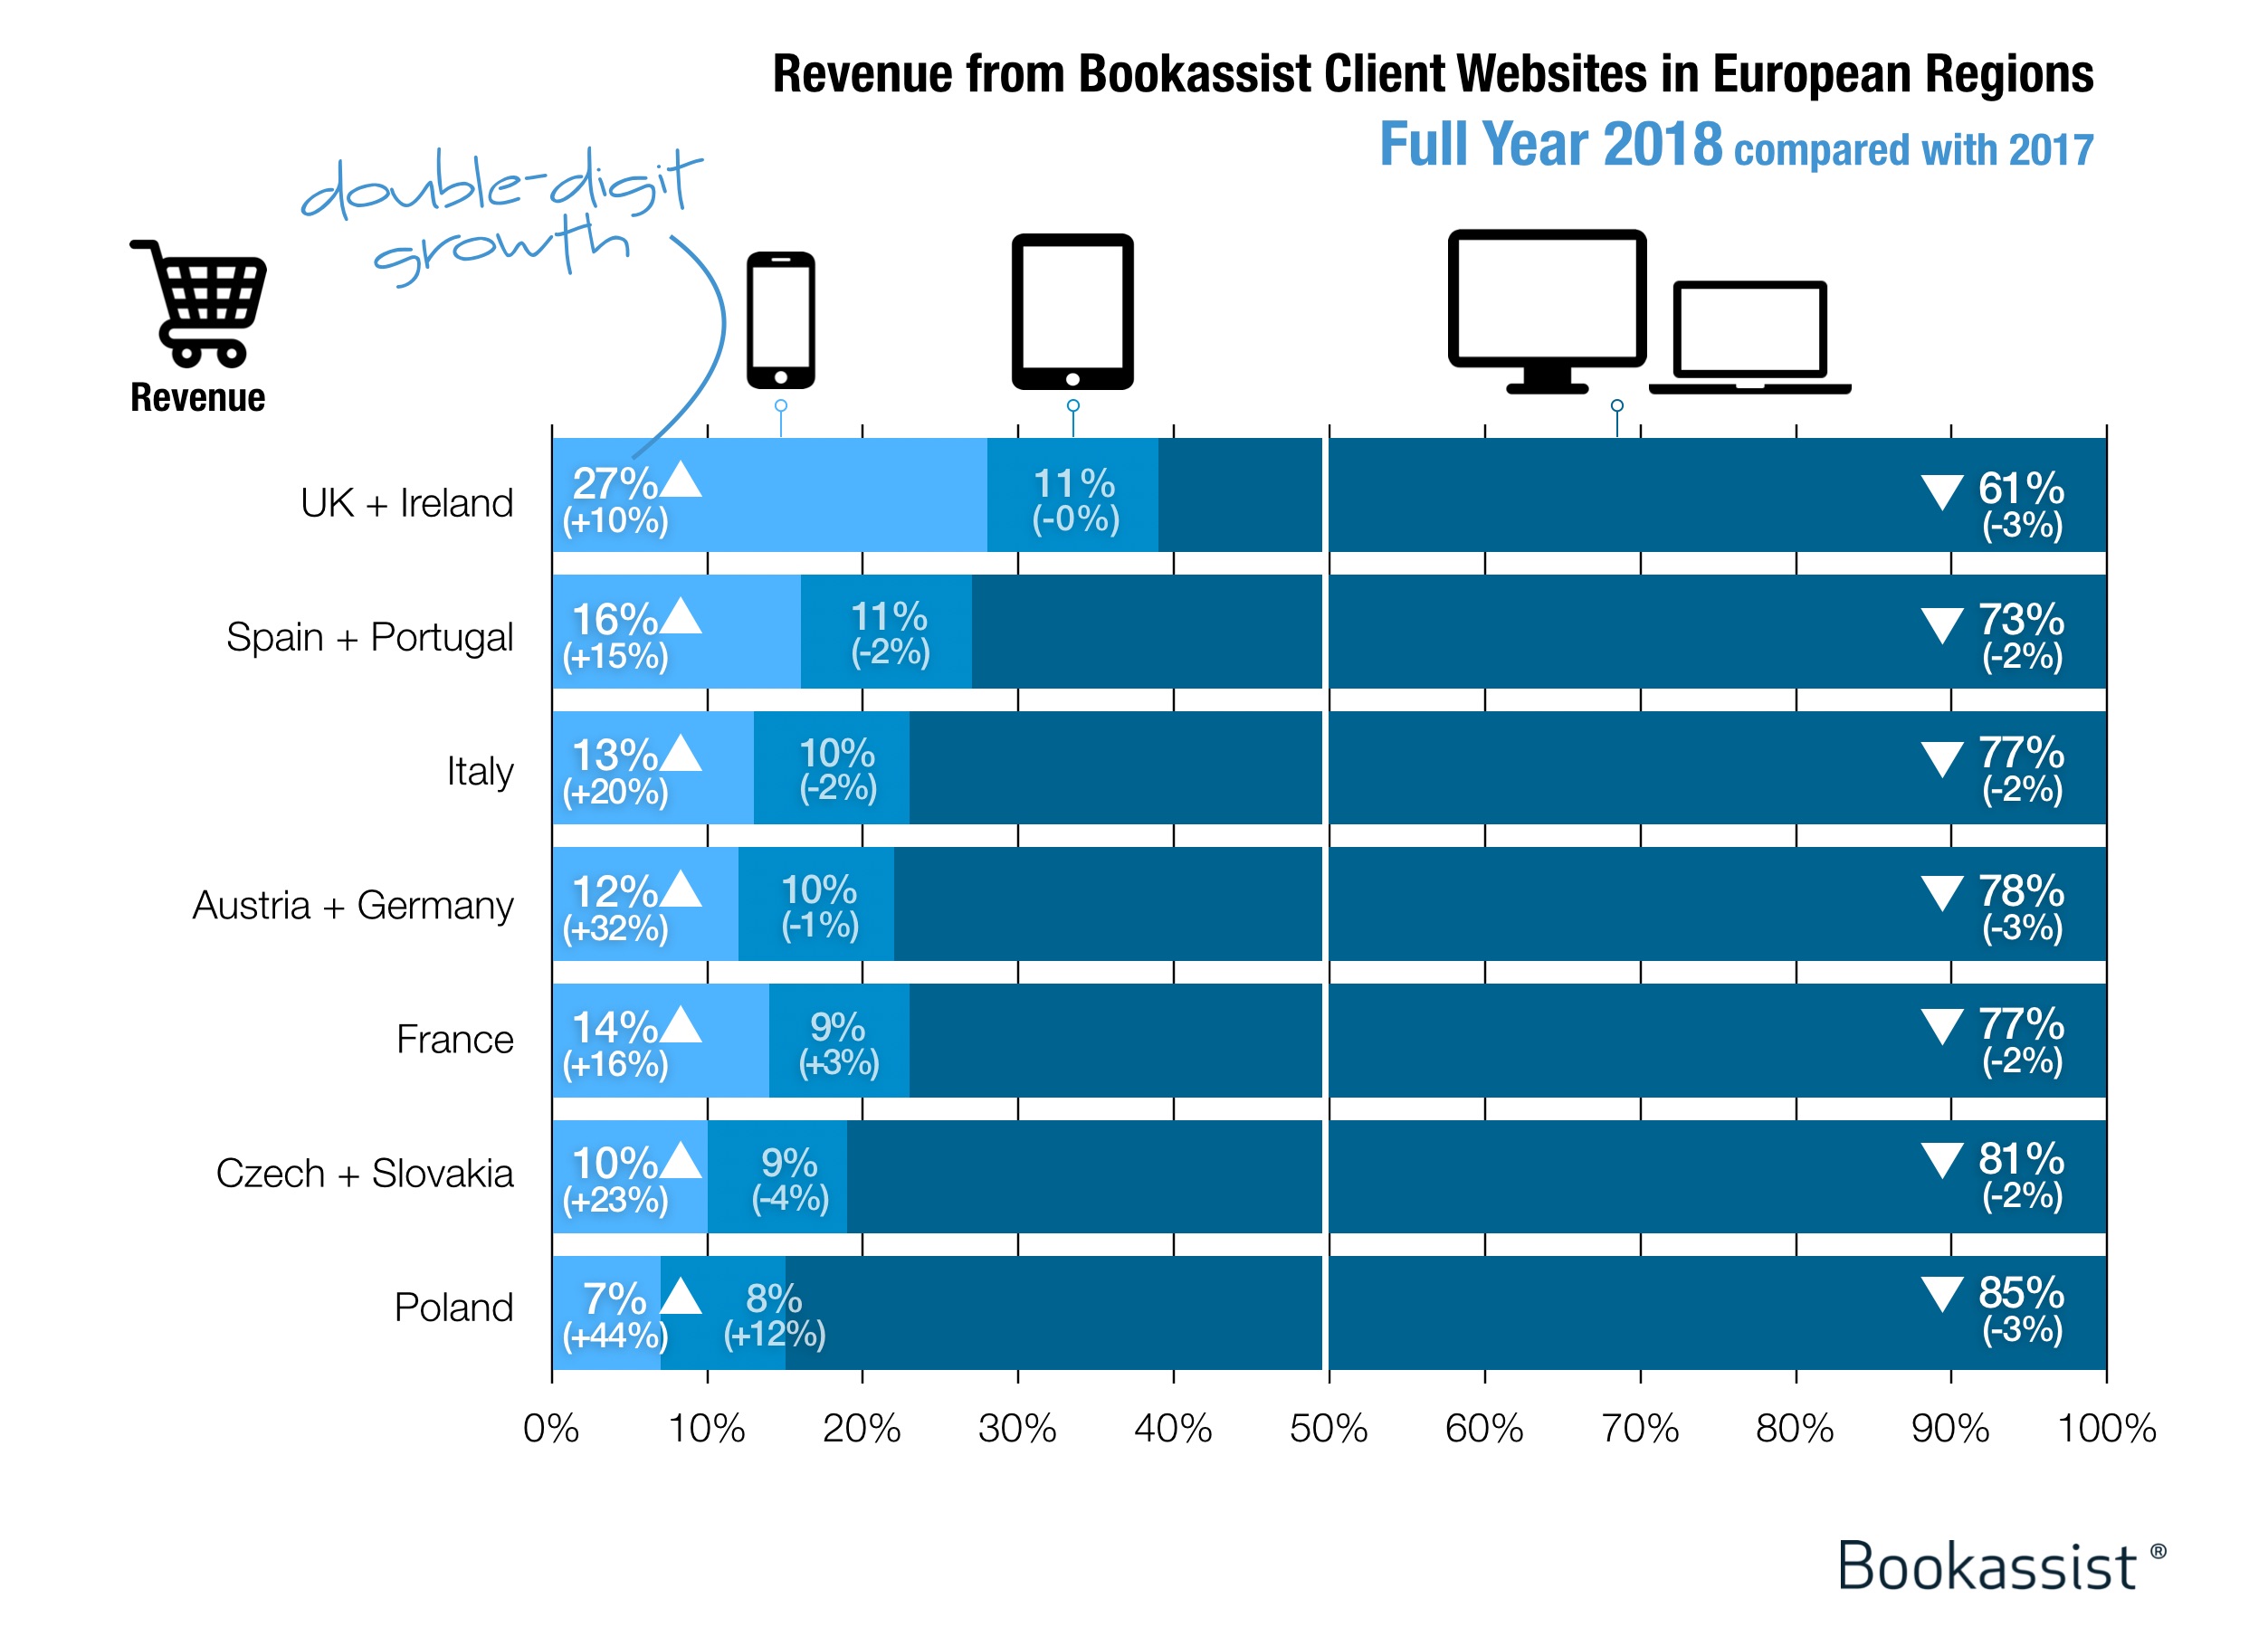 chart comparing Bookassist client's mobile and desktop revenue for 2017 and 2018